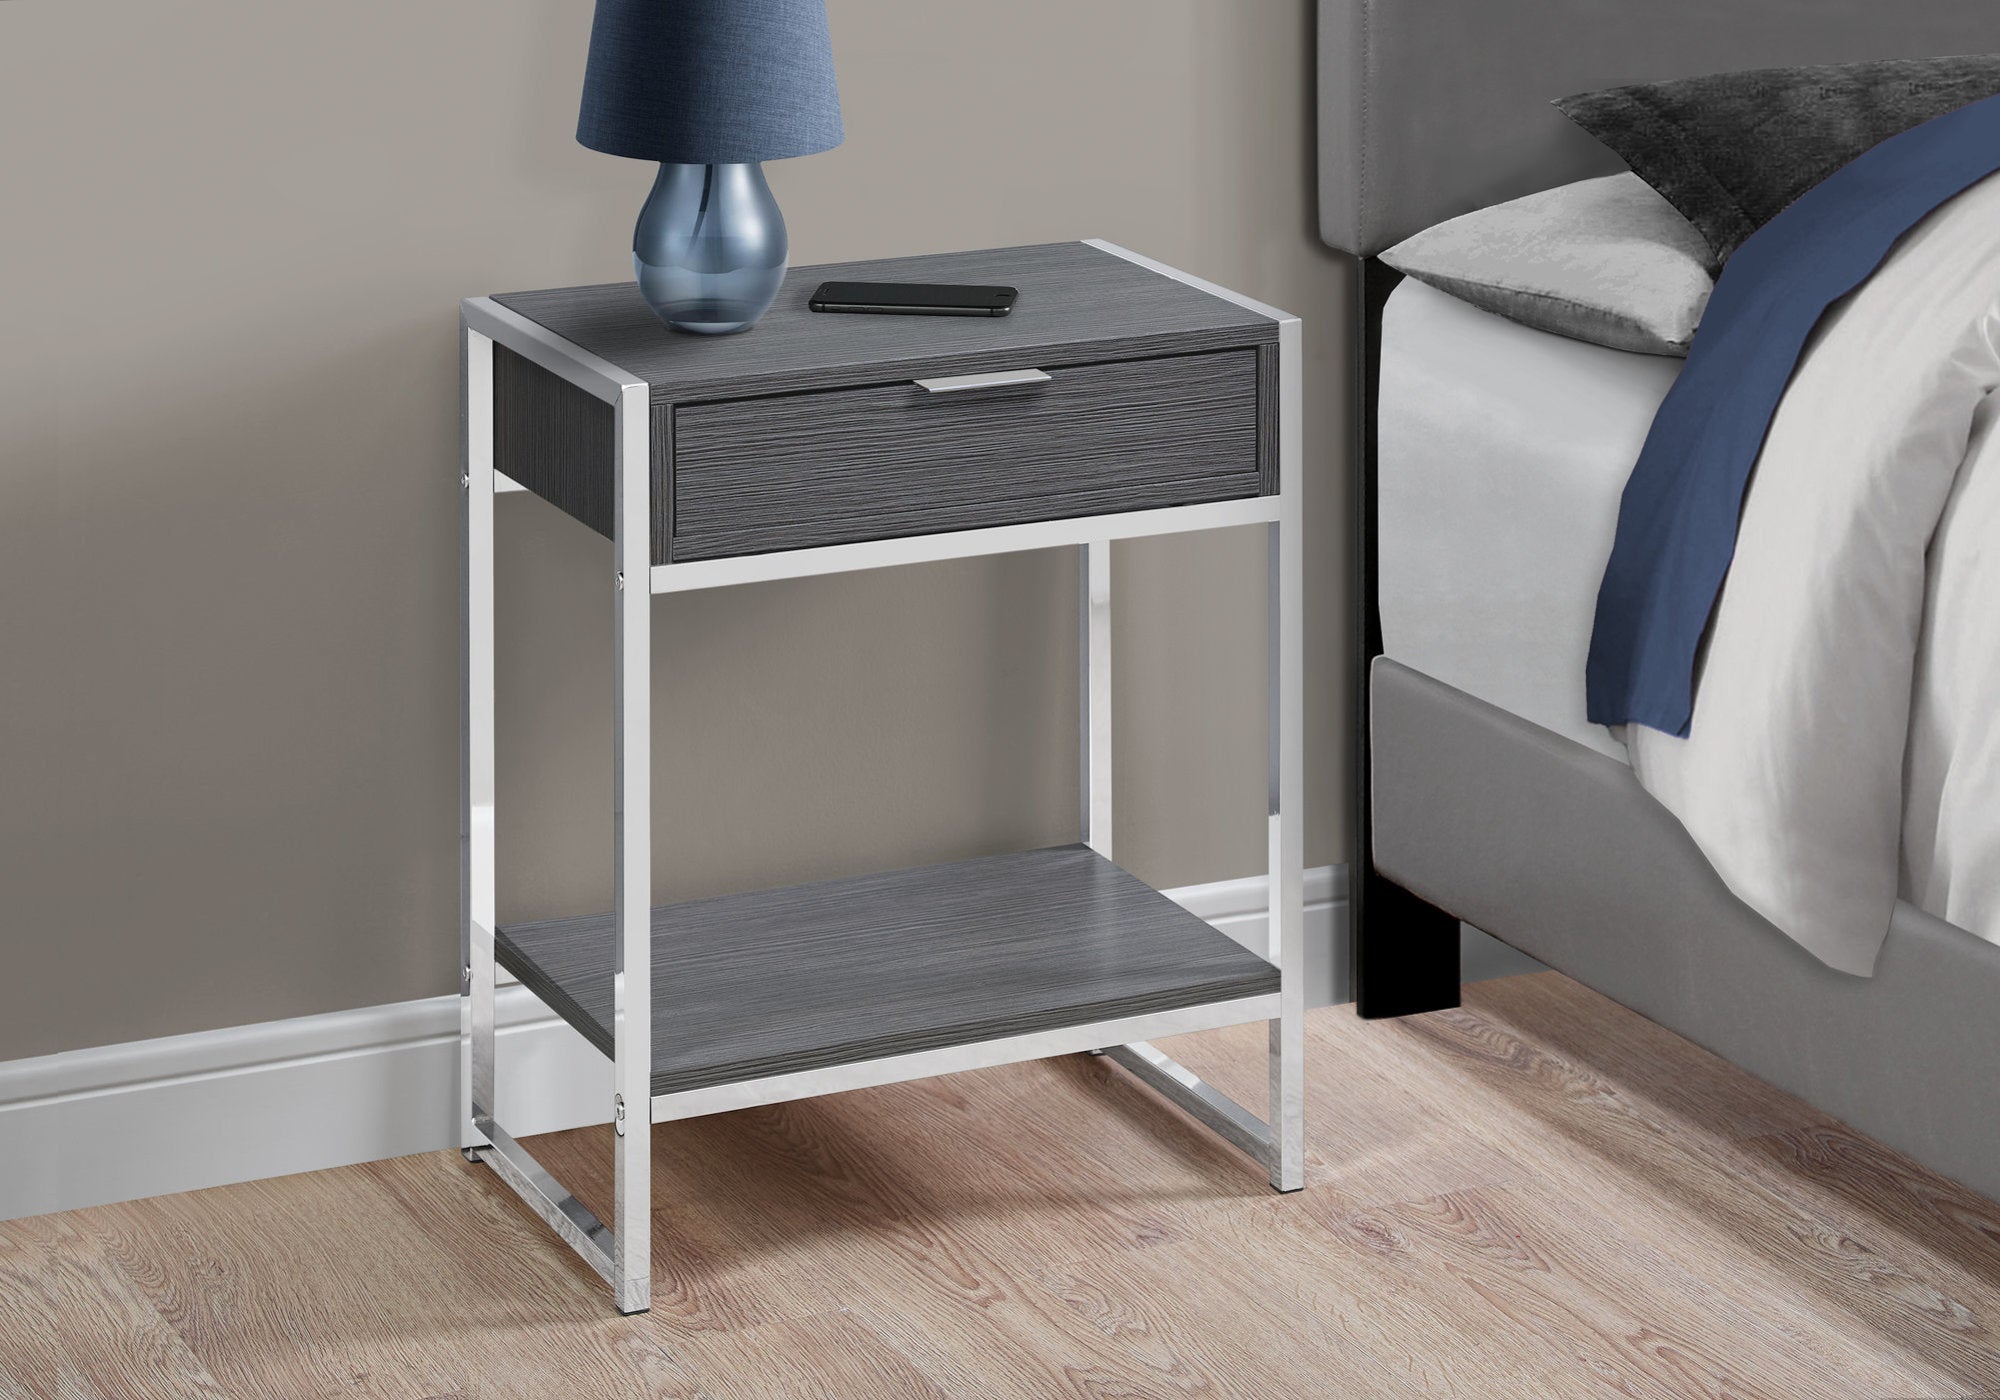 MN-913484    Accent Table, Side, End, Nightstand, Lamp, Living Room, Bedroom, Metal Legs, Laminate, Grey, Chrome, Contemporary, Modern